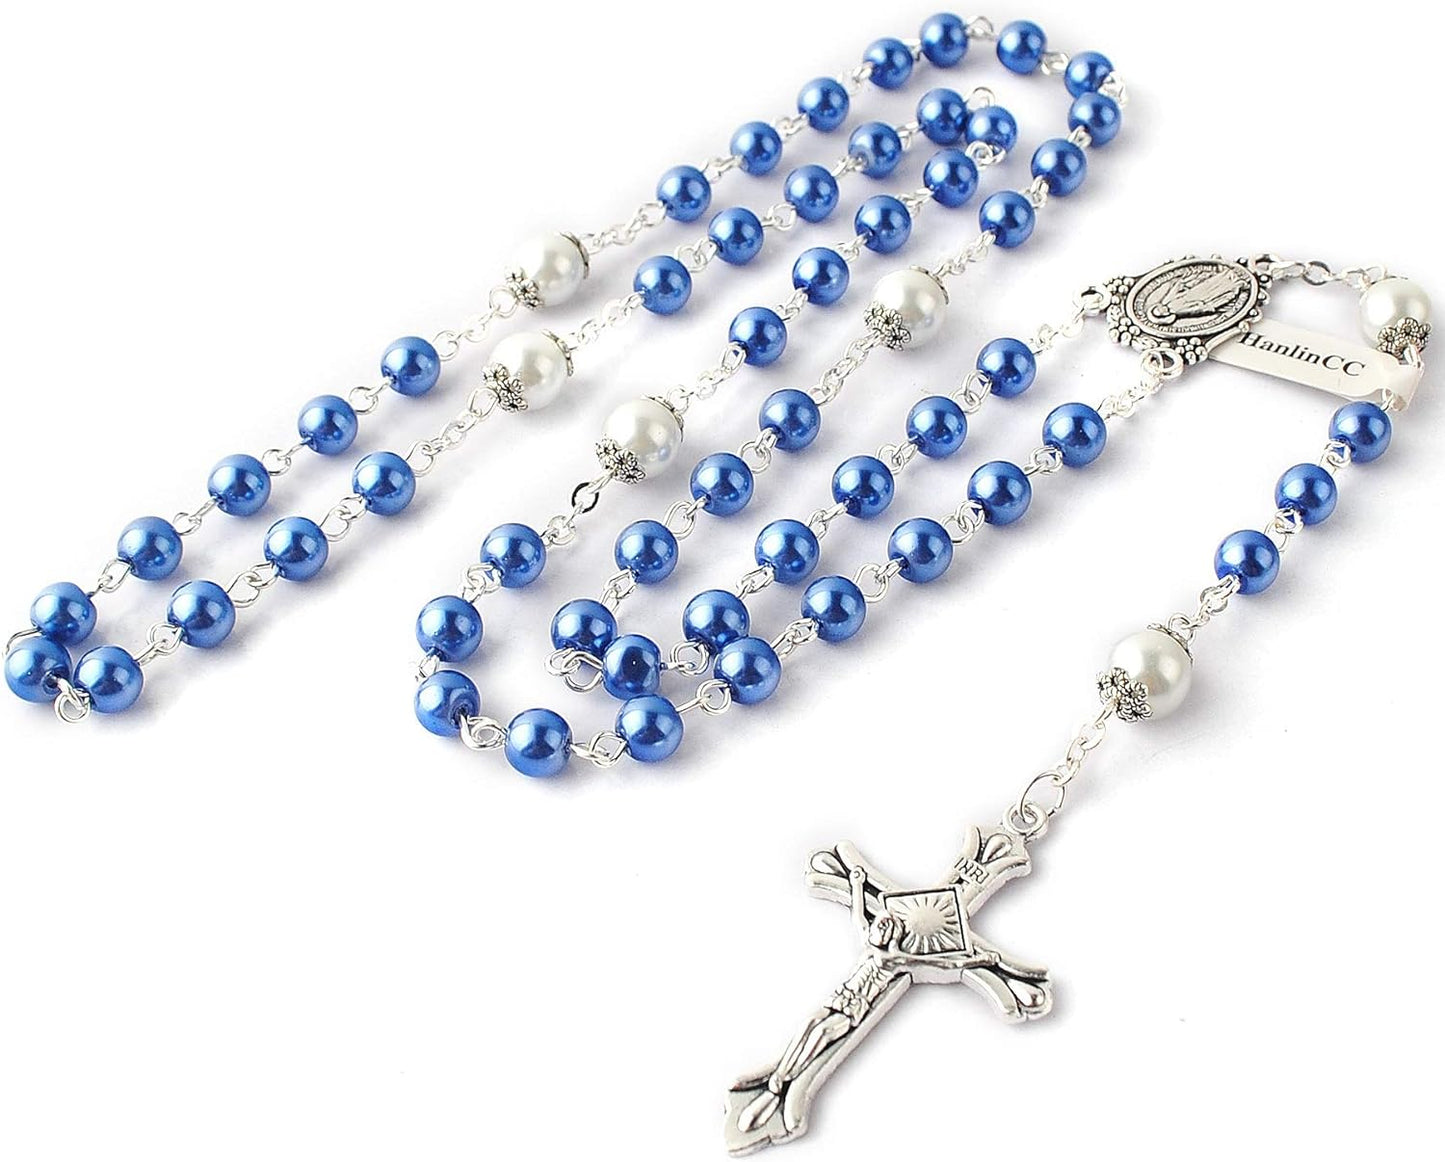 Our Father Rosary Pack in Miraculous Metal Gift Box Christian Gift Idea claimedbygoddesigns